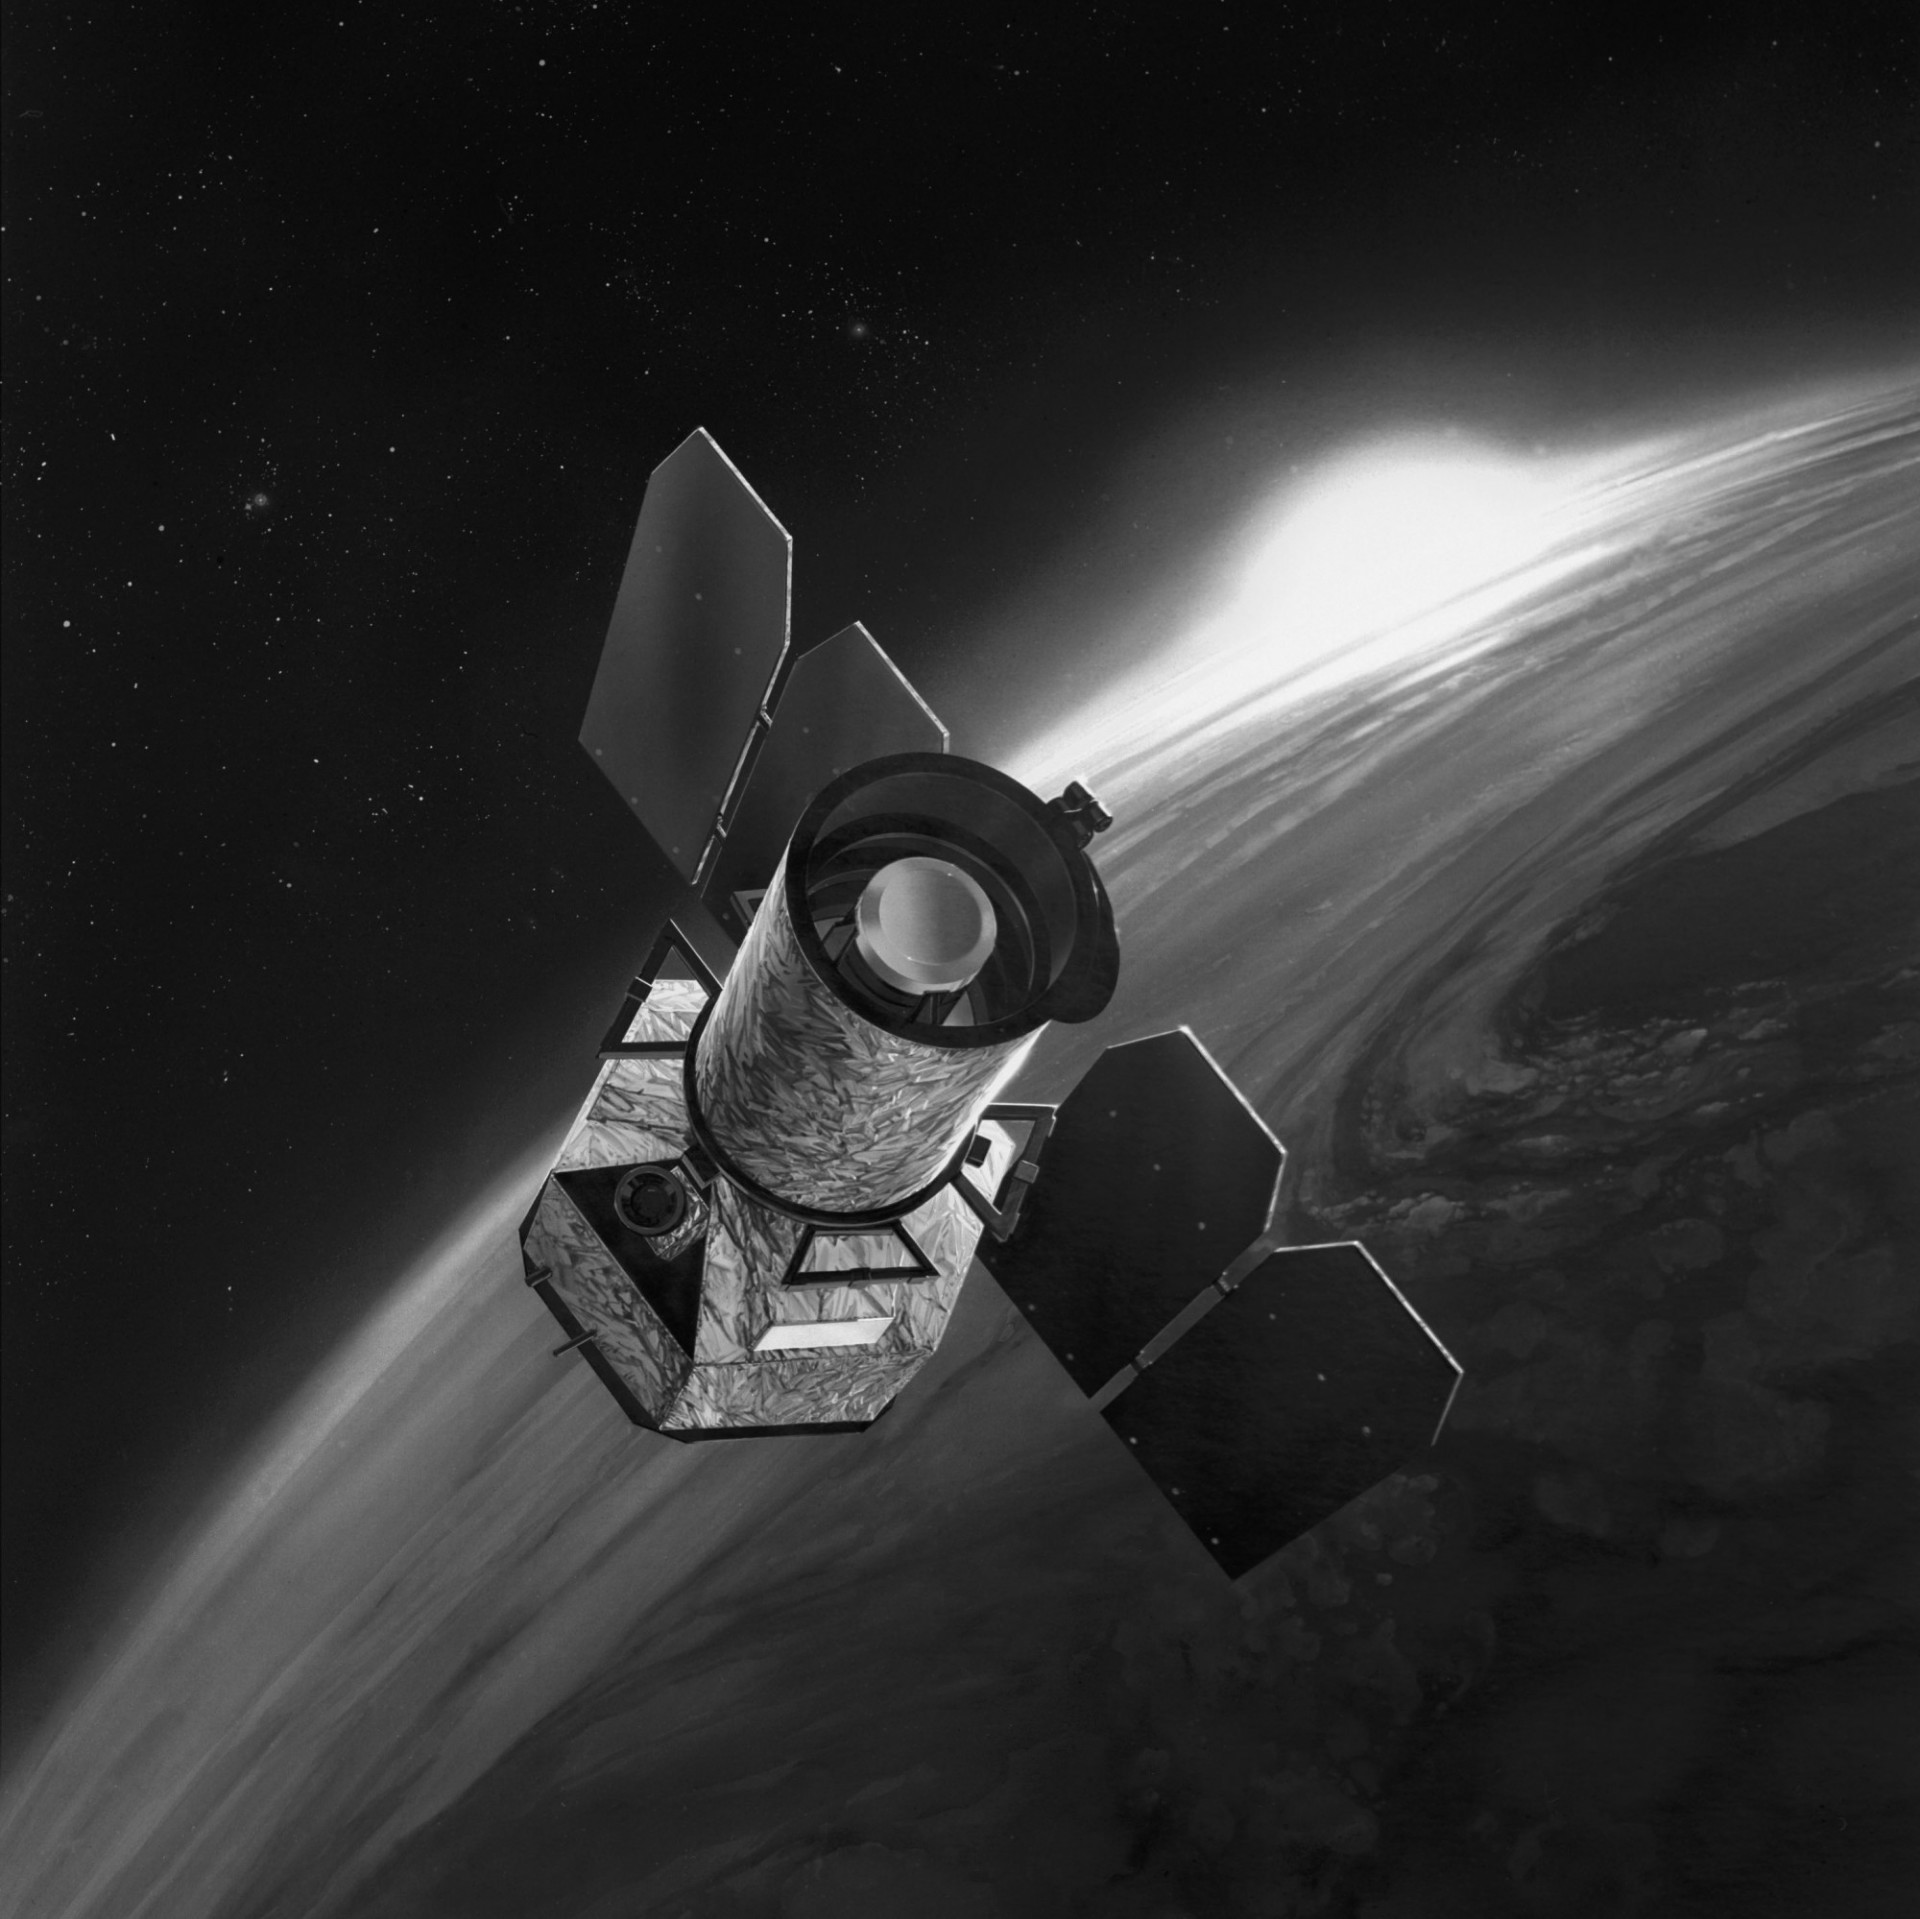 Illustrative image of GALEX in space.